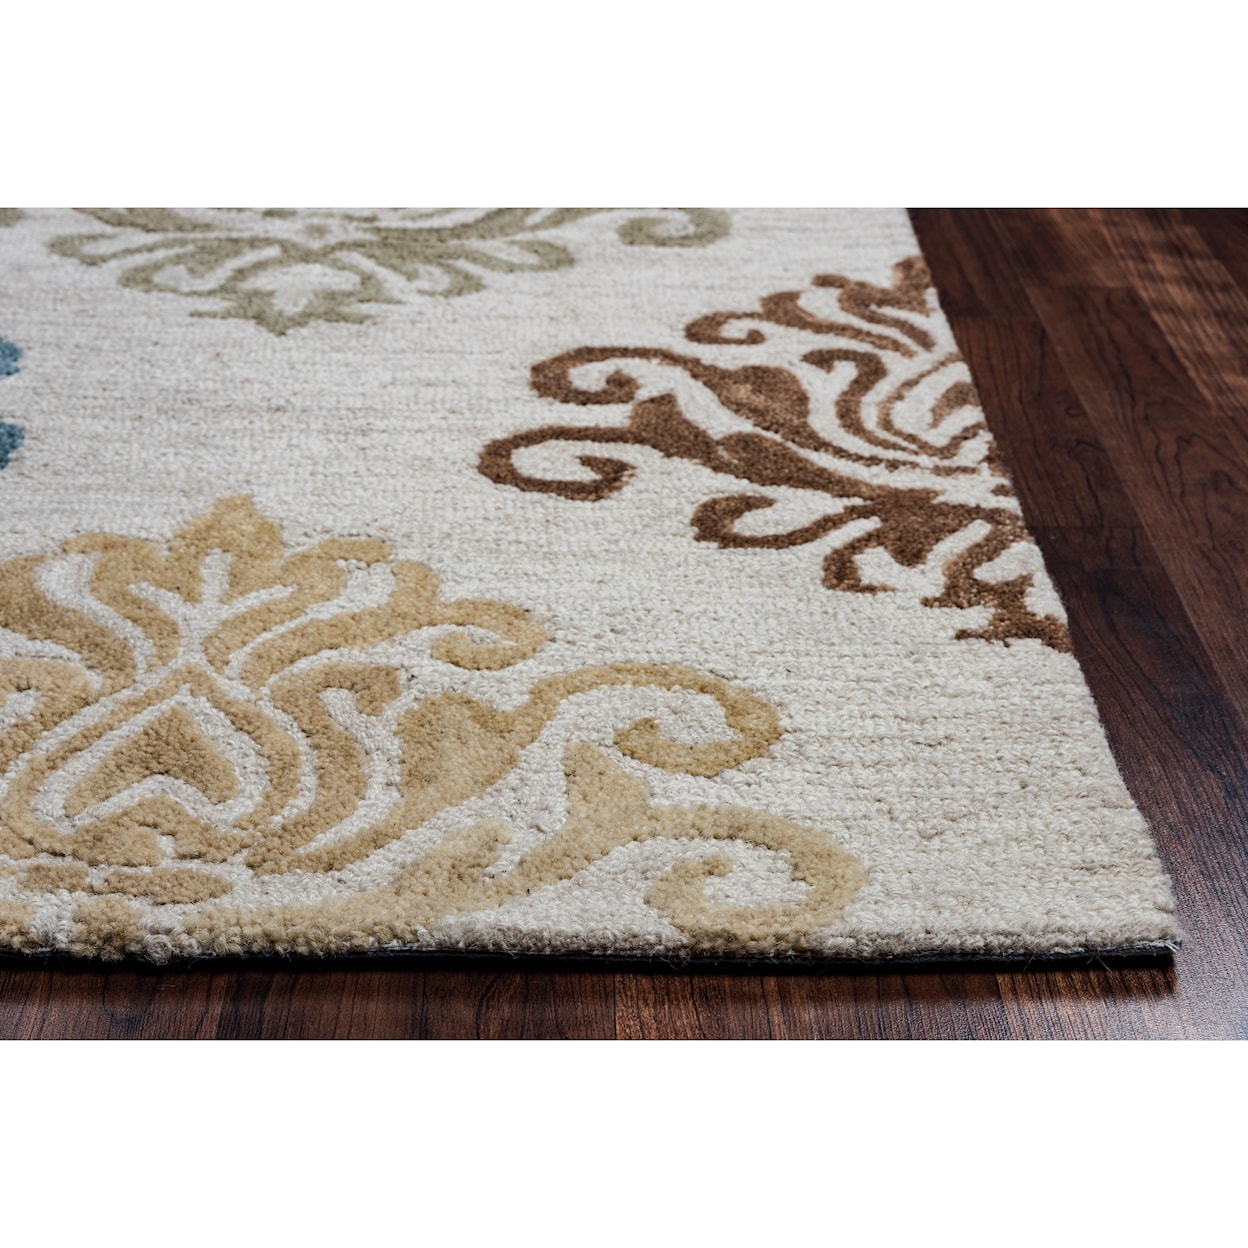 Rizzy Home Lancaster 8' x 10' Rectangle Rug